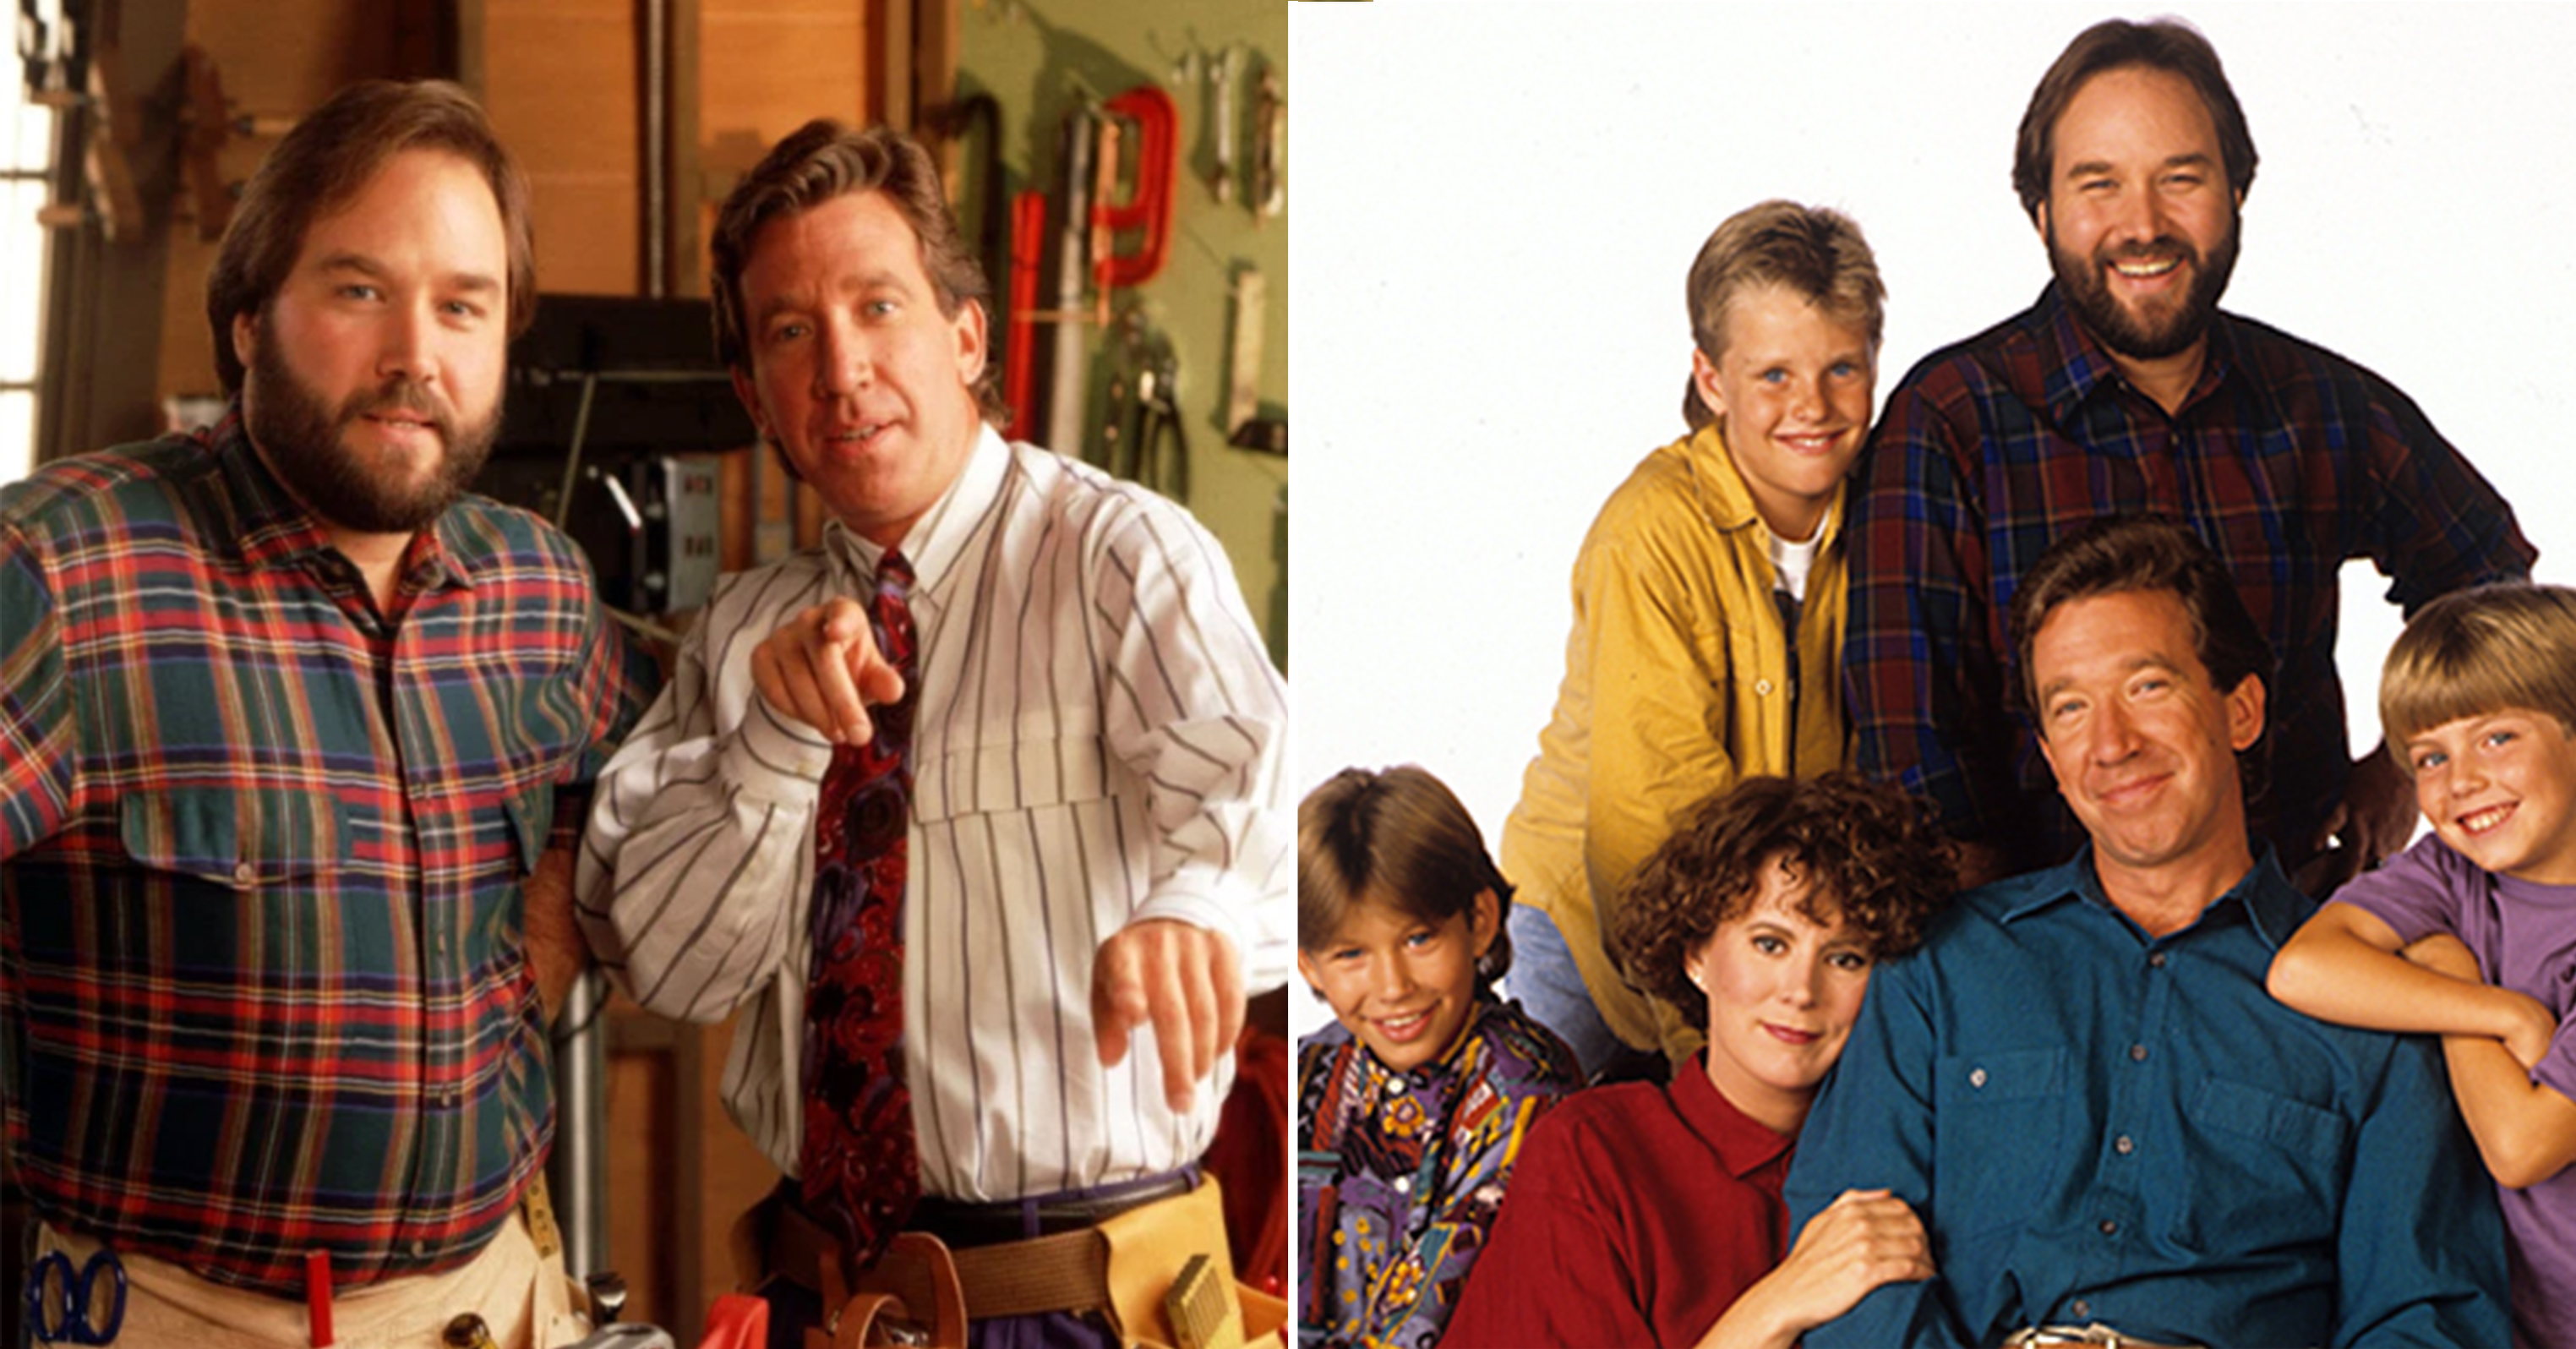 13 Facts You Probably Never Knew About Home Improvement!